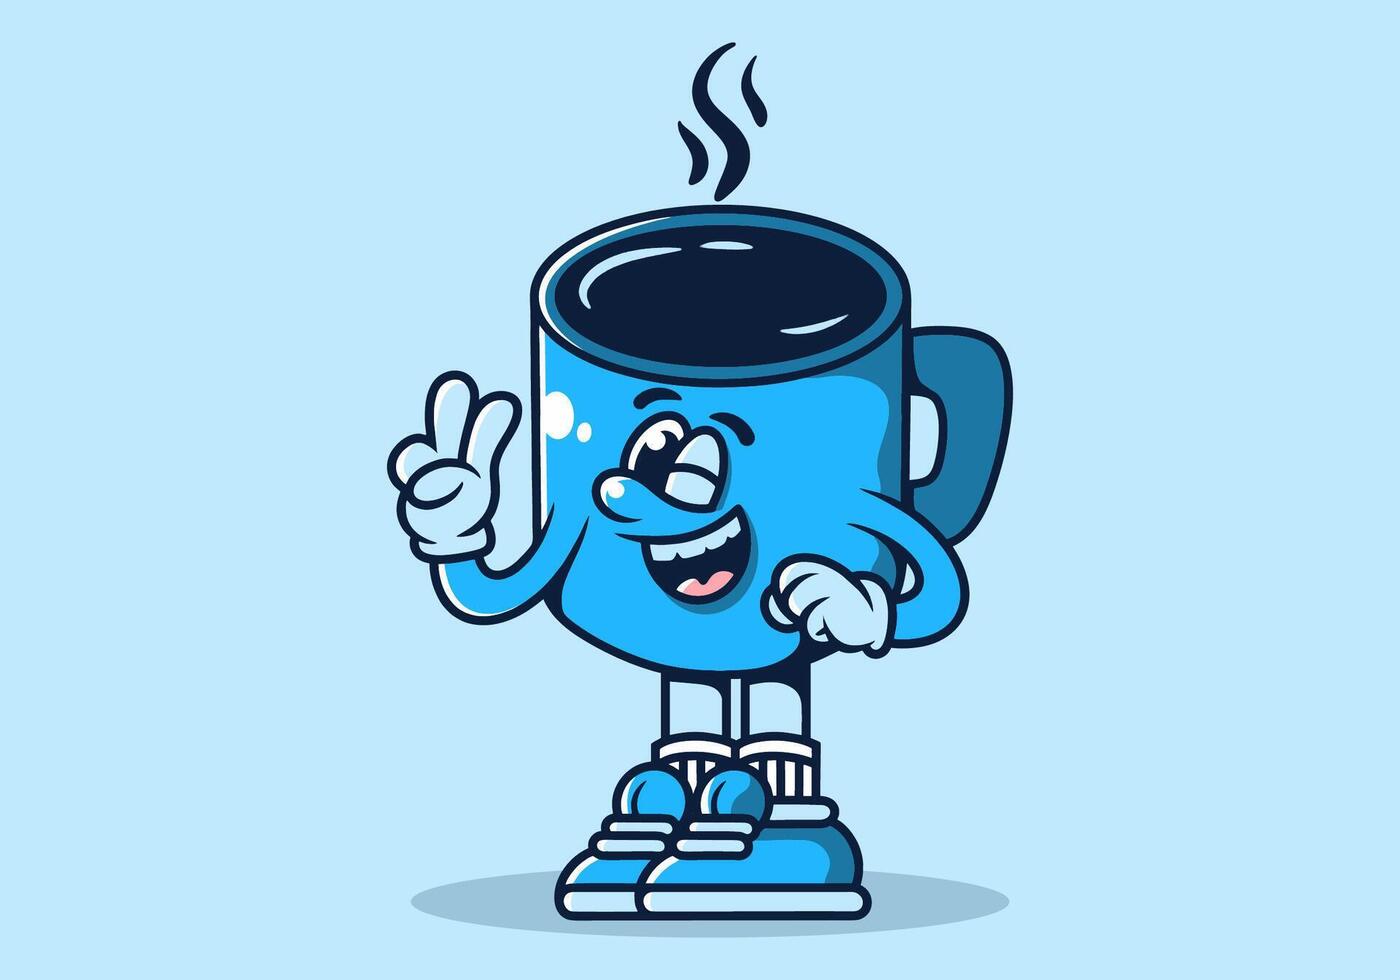 Character illustration of coffee mug with hand form a symbol of peace. Blue color vector